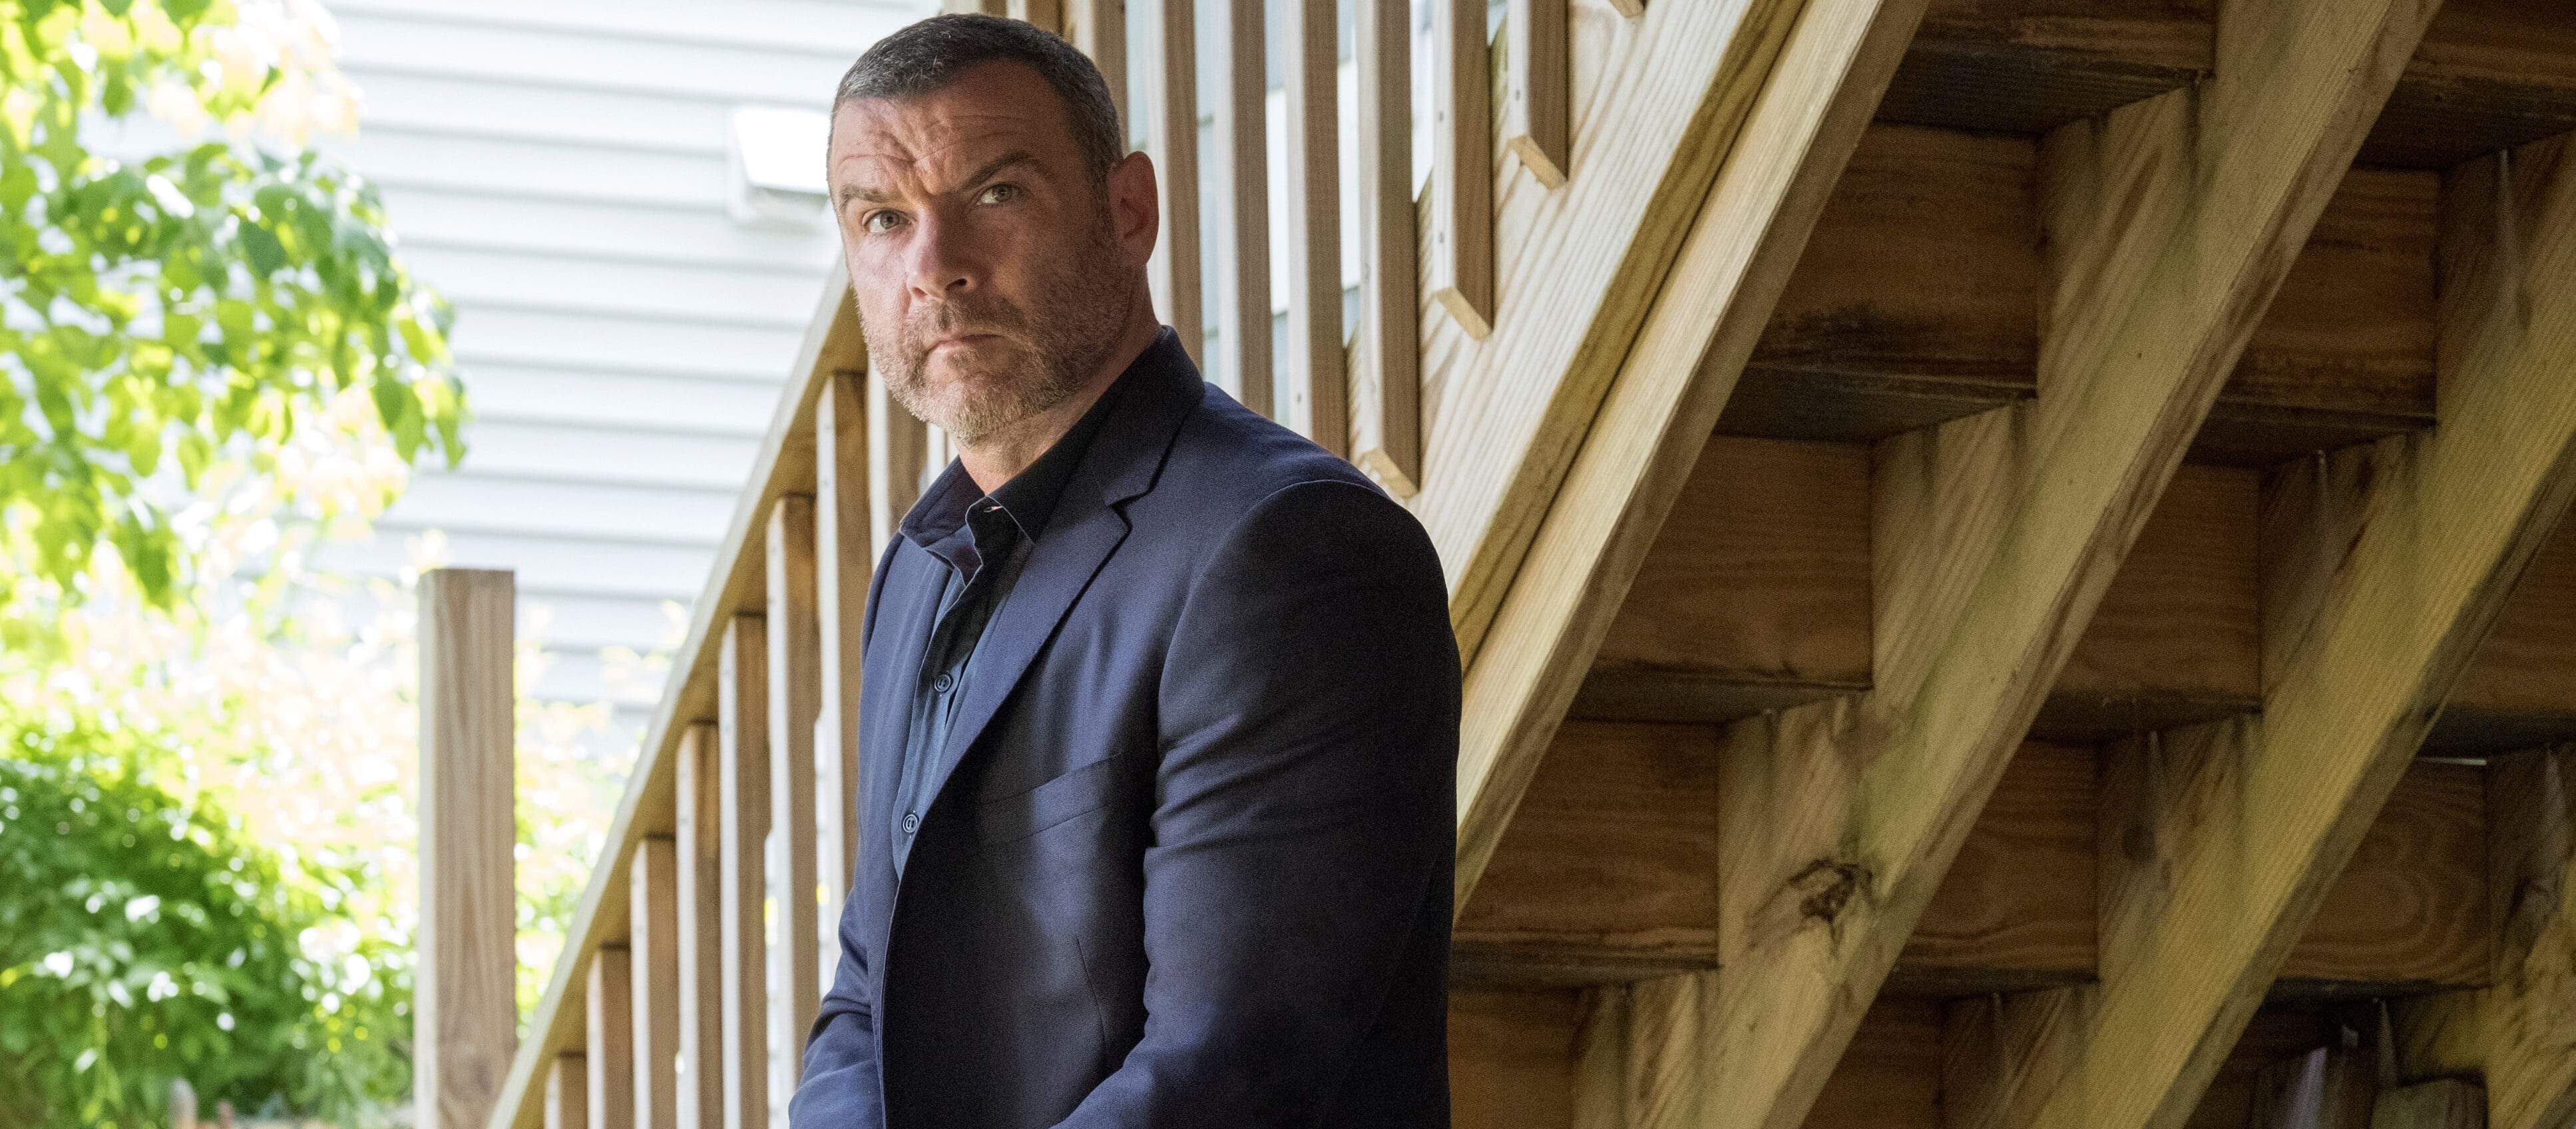 Where to Watch Ray Donovan?